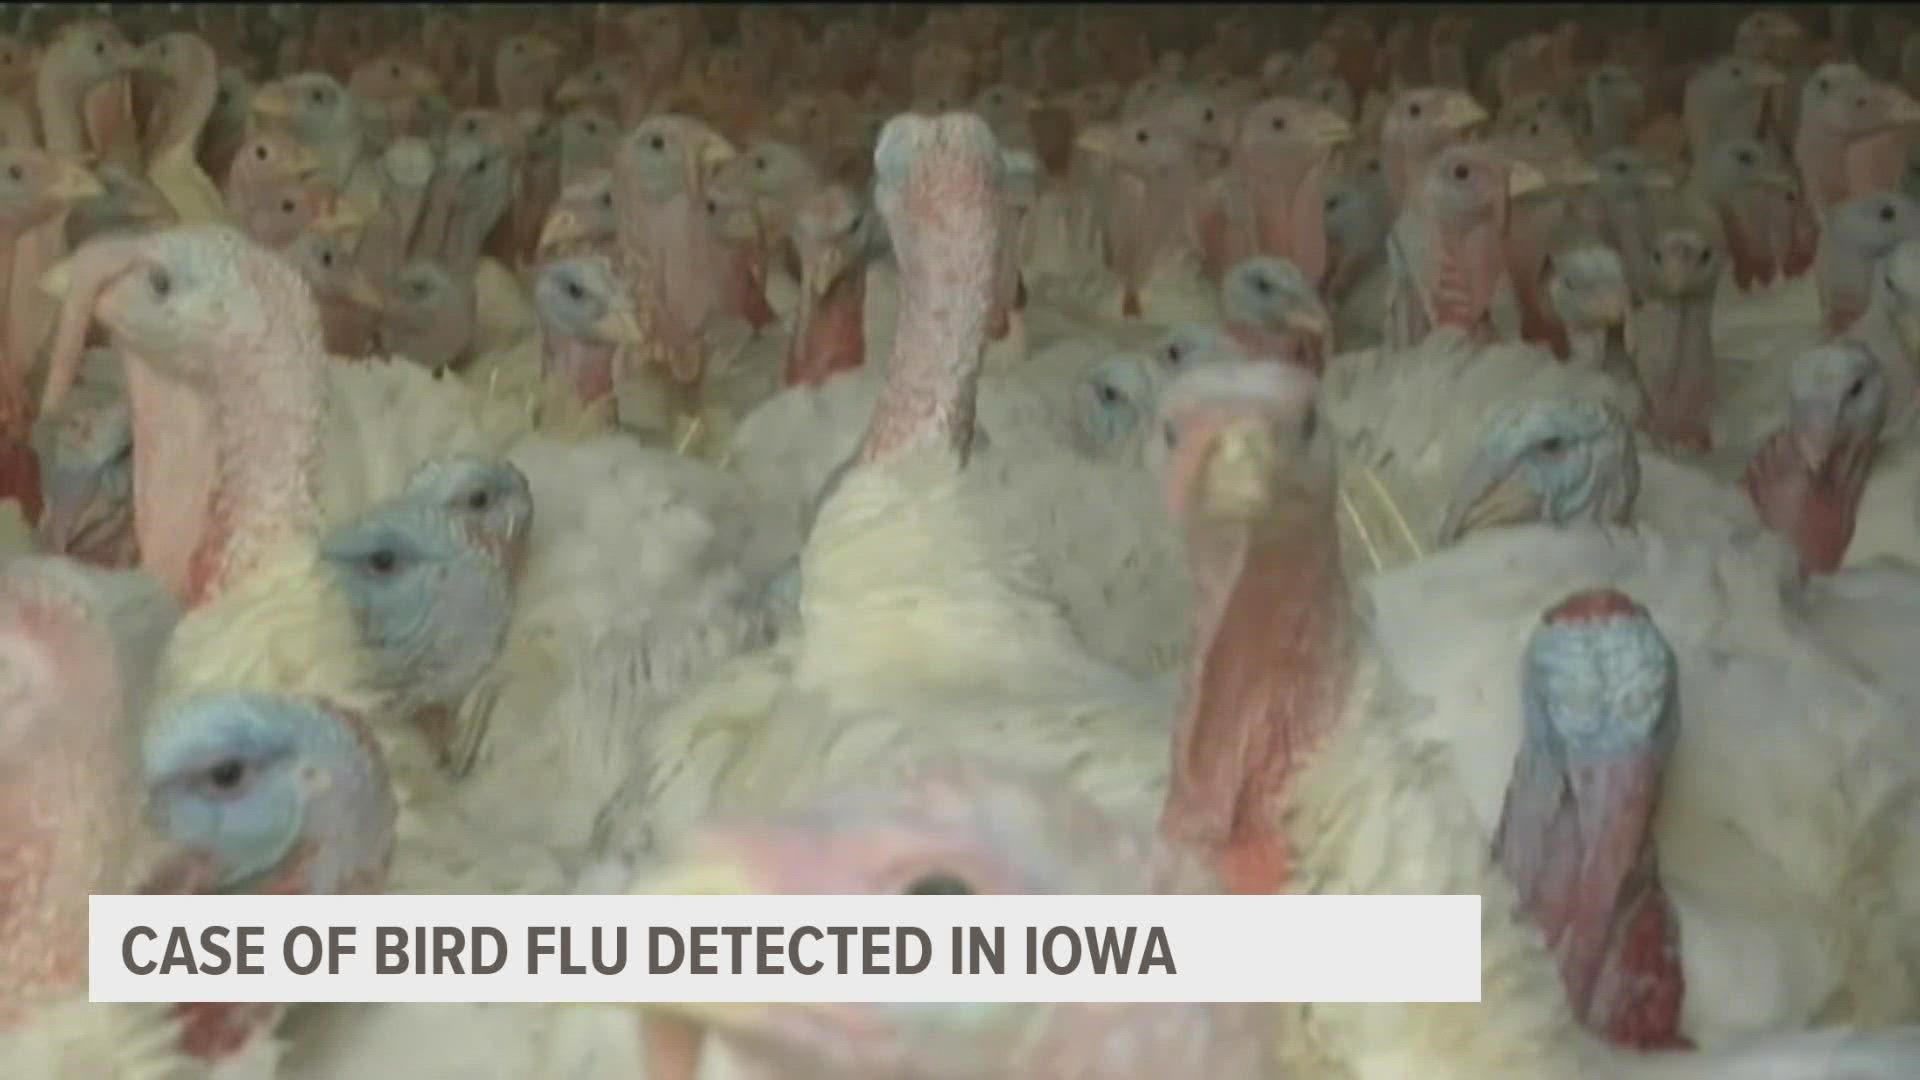 The Iowa Department of Agriculture said Wednesday there is no health concern for the public.